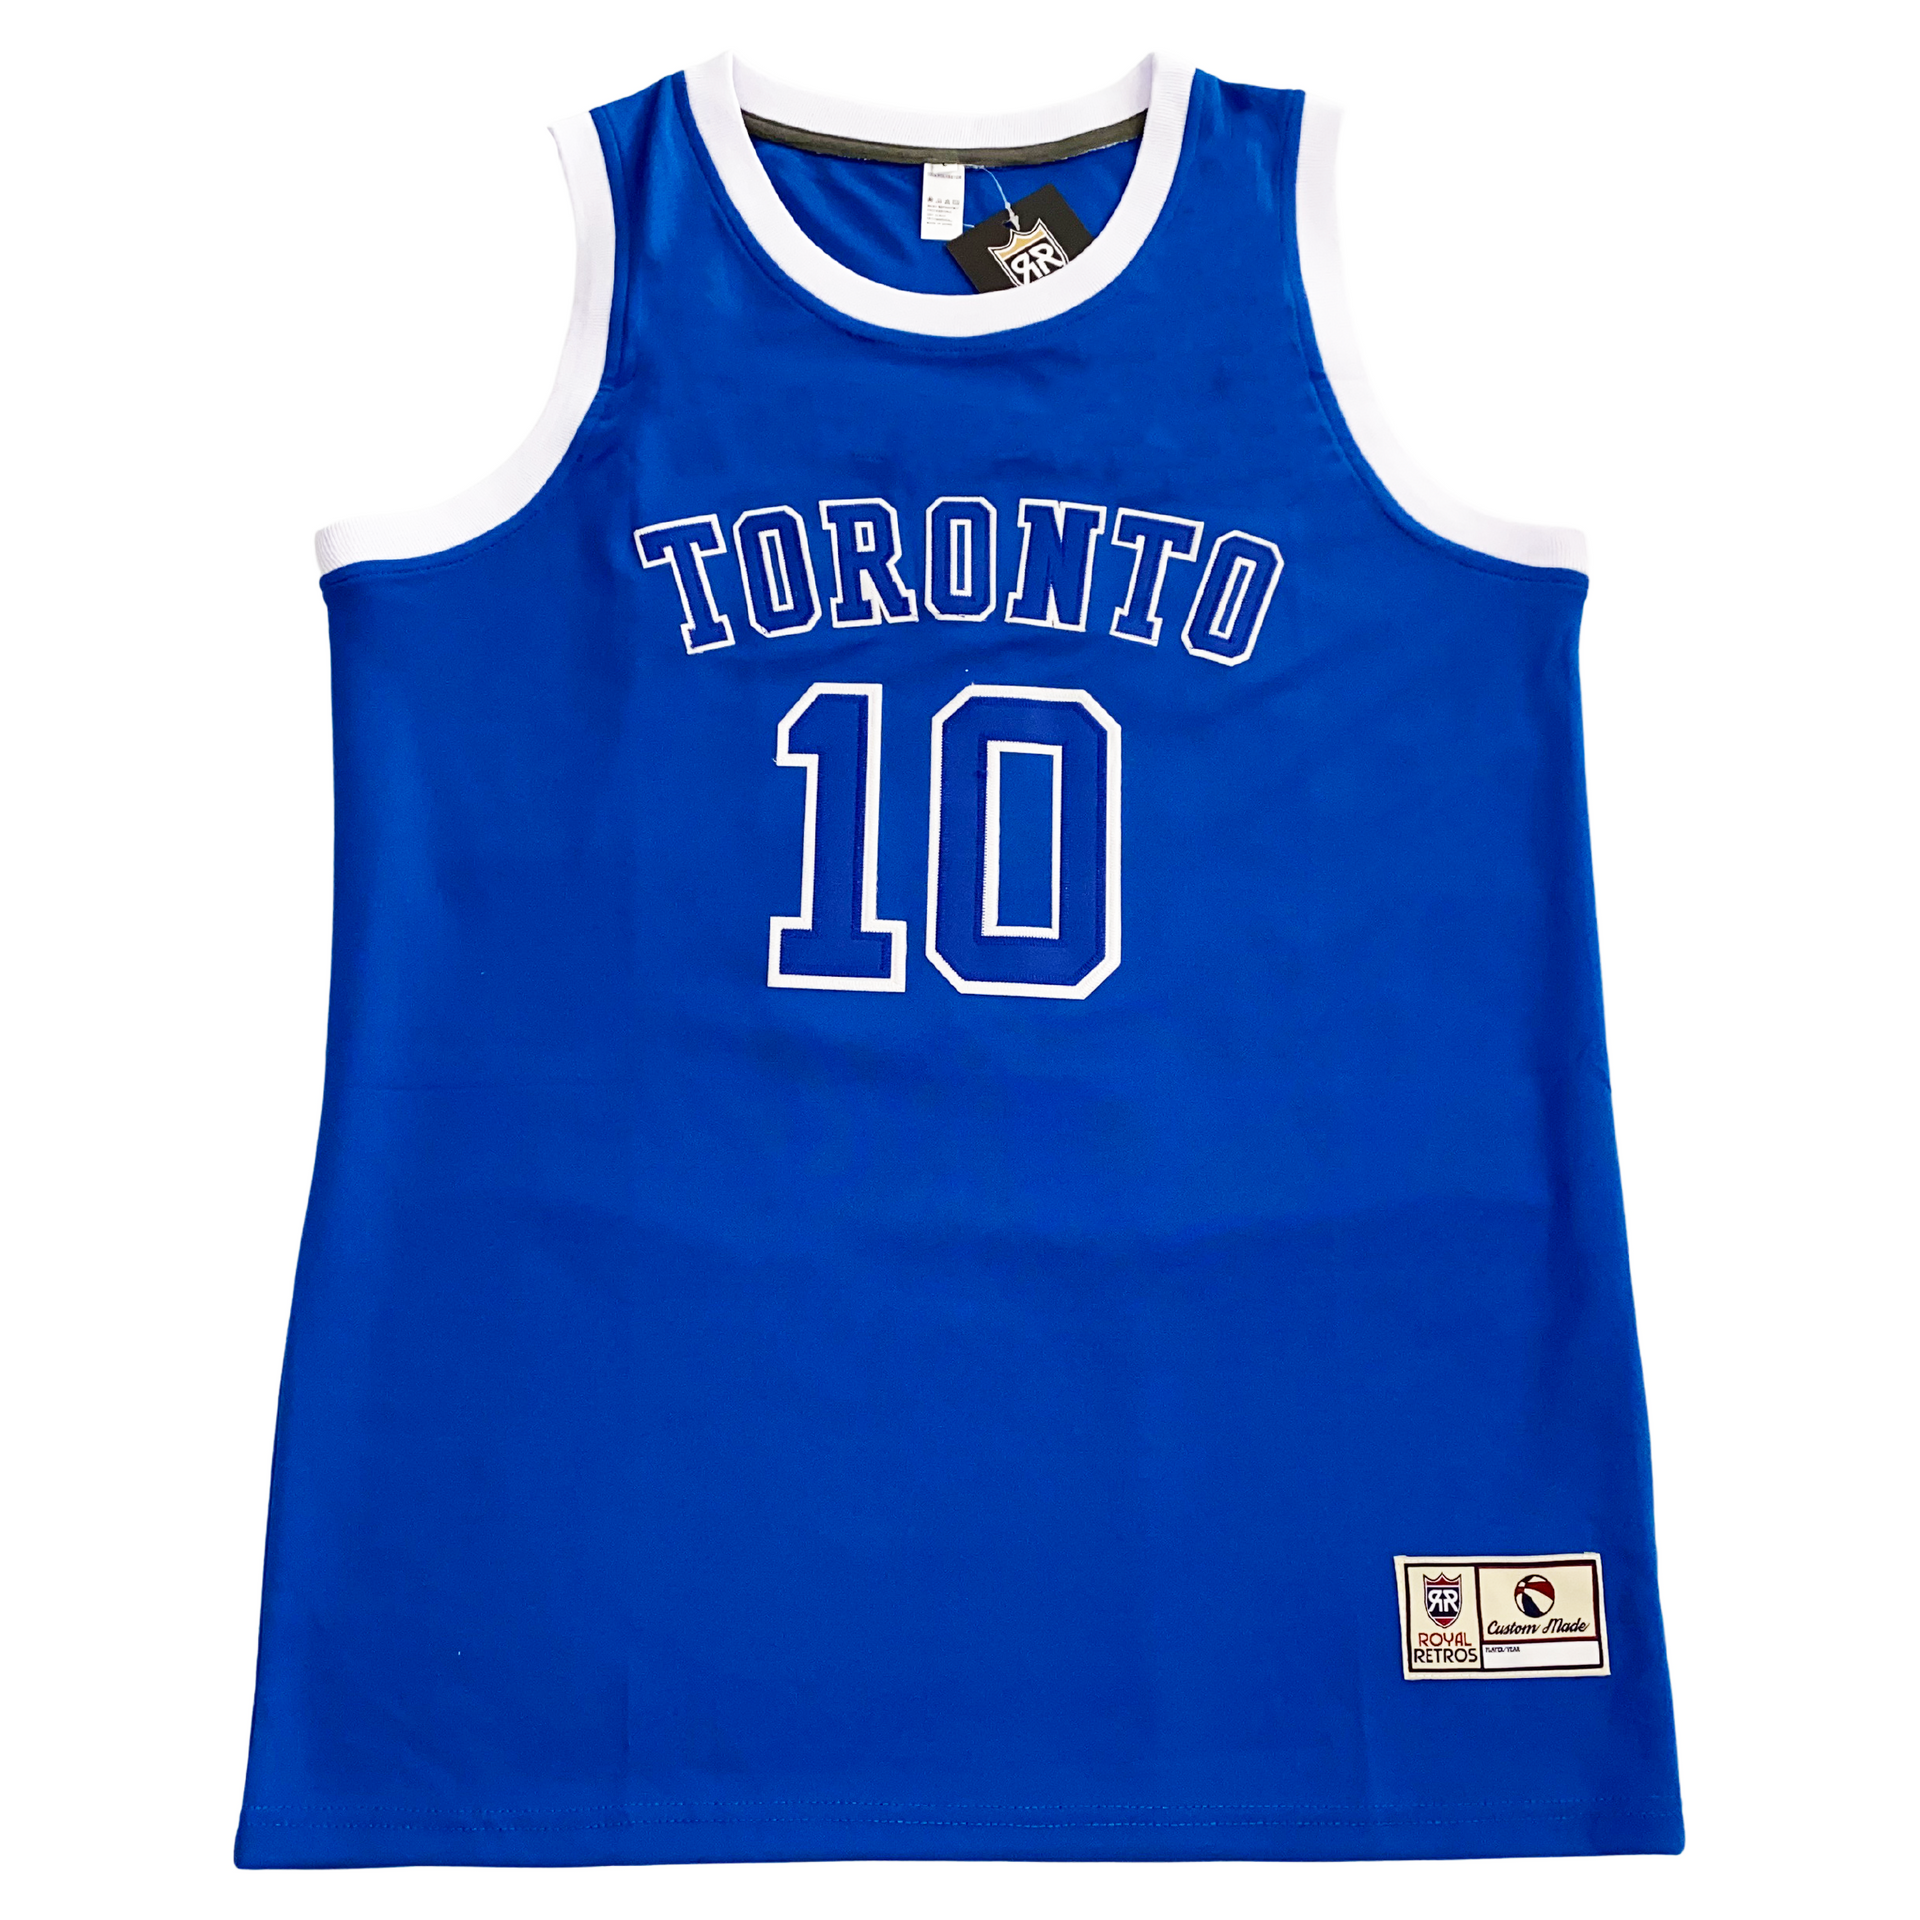 Sports Jersey Week: The Huskies name could have solved Toronto's